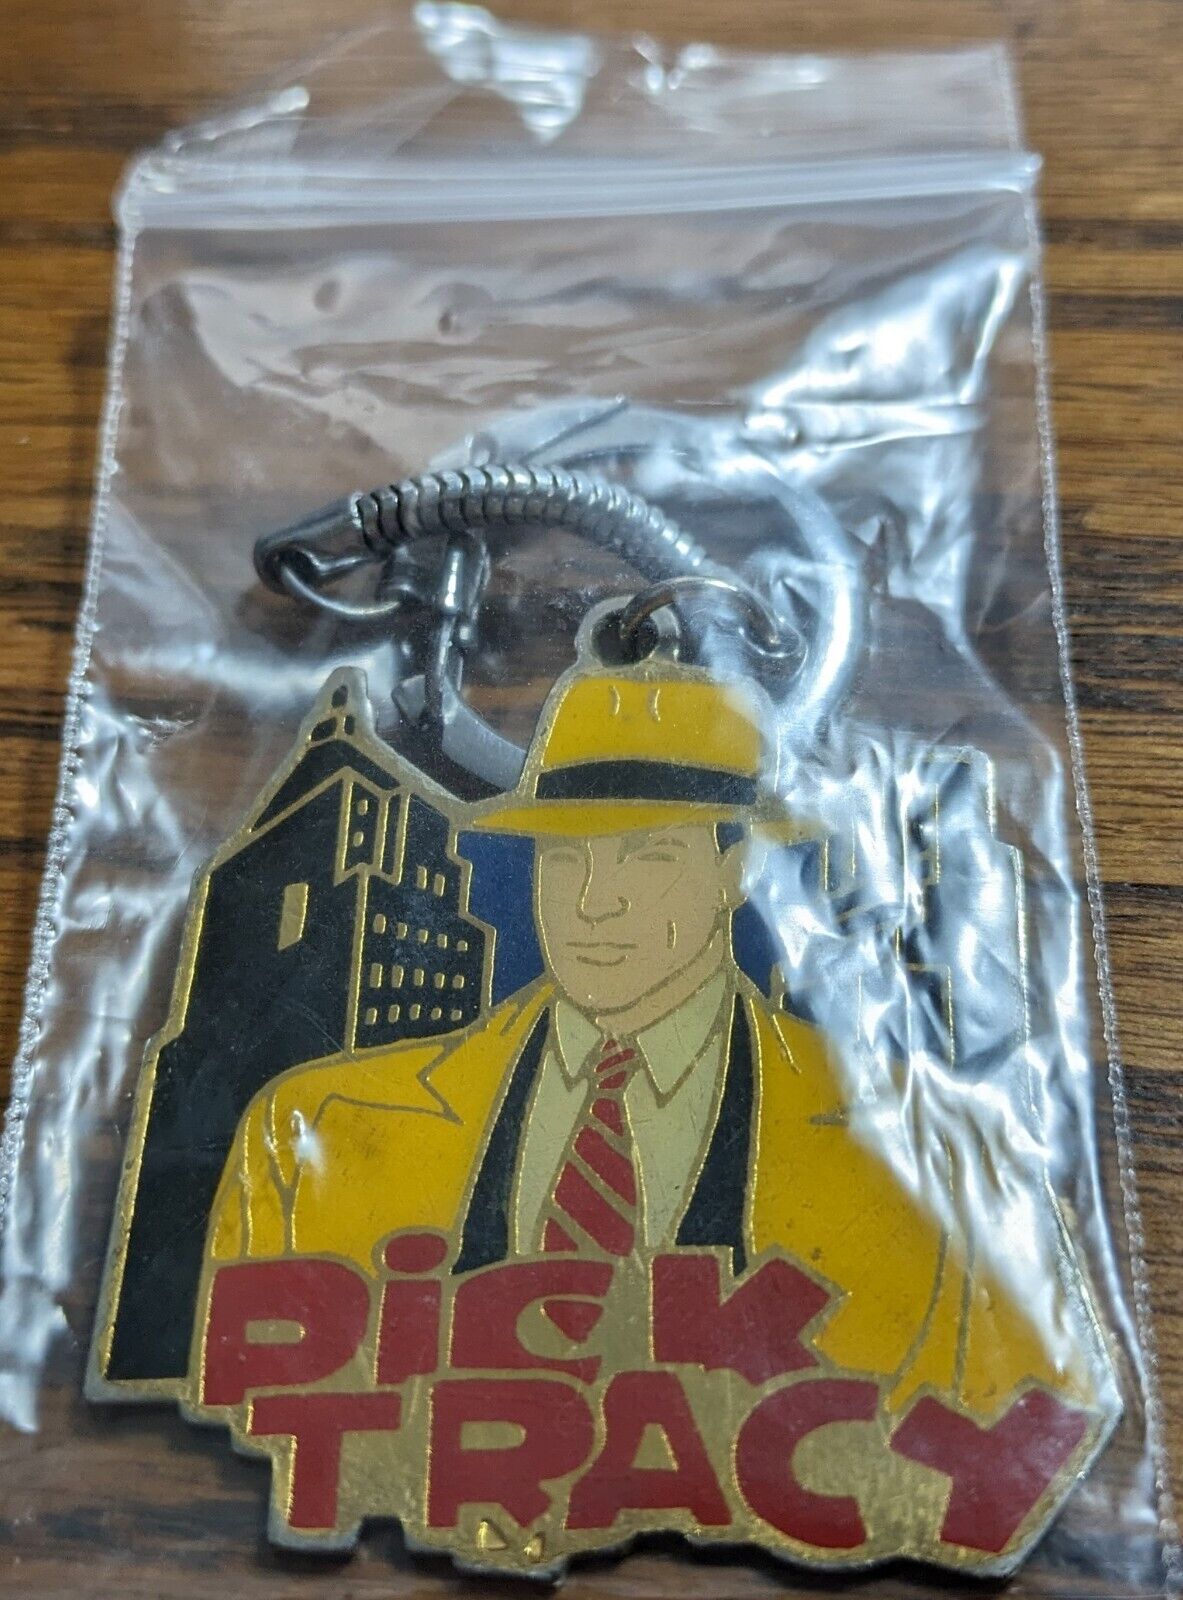 DICK TRACEY VINTAGE 1990 KEY CHAIN BY DISNEY